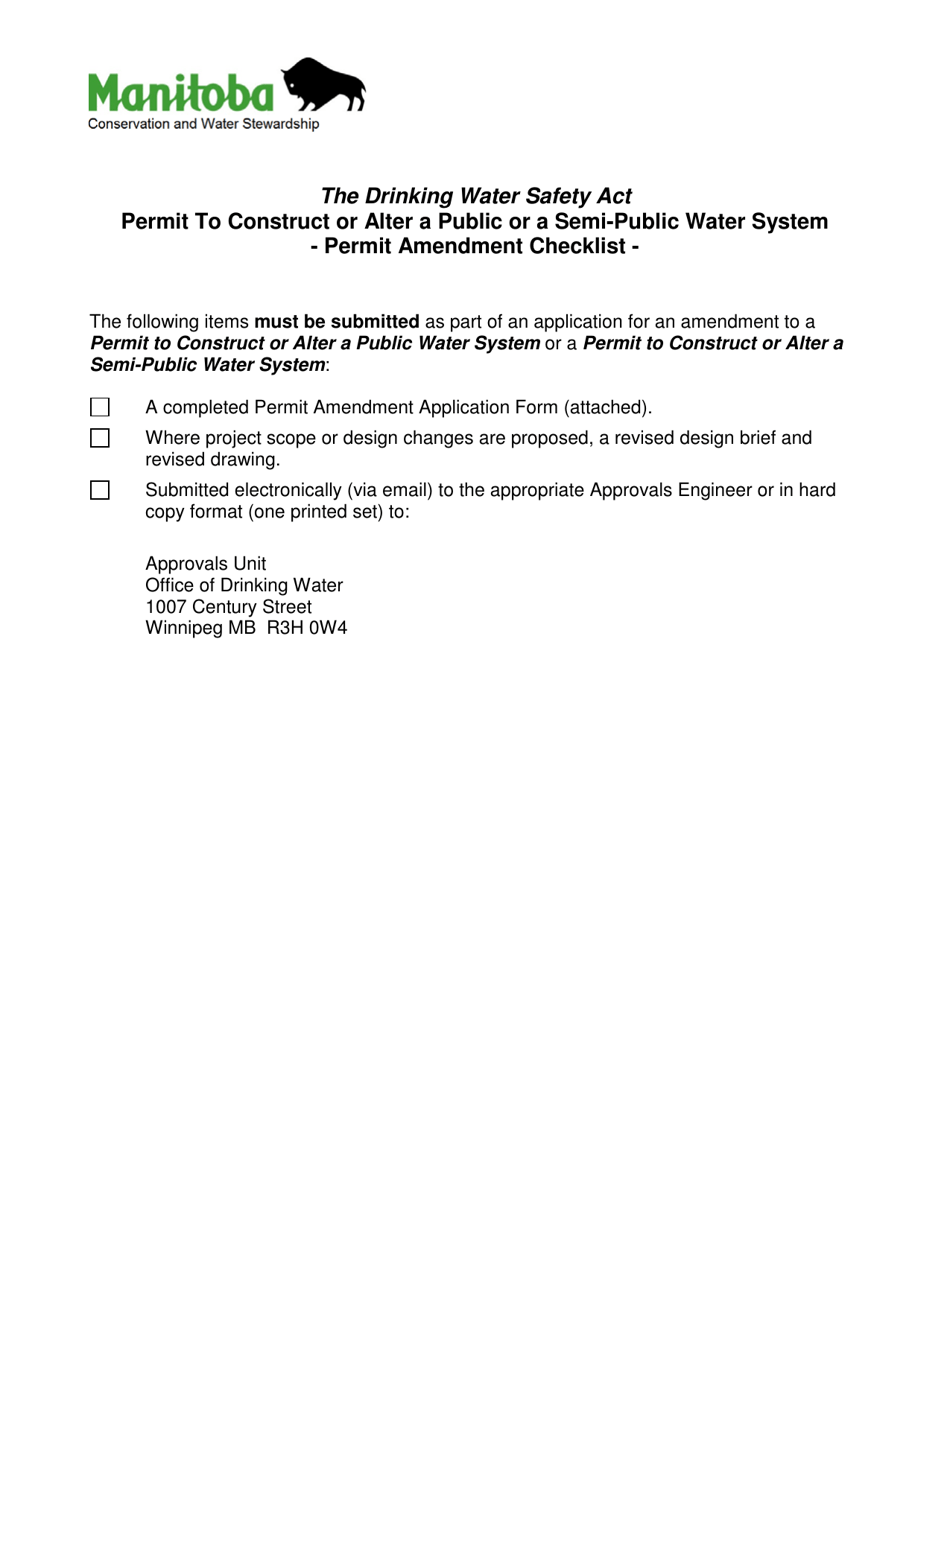 Amendment to a Permit to Construct or Alter - Manitoba, Canada, Page 1